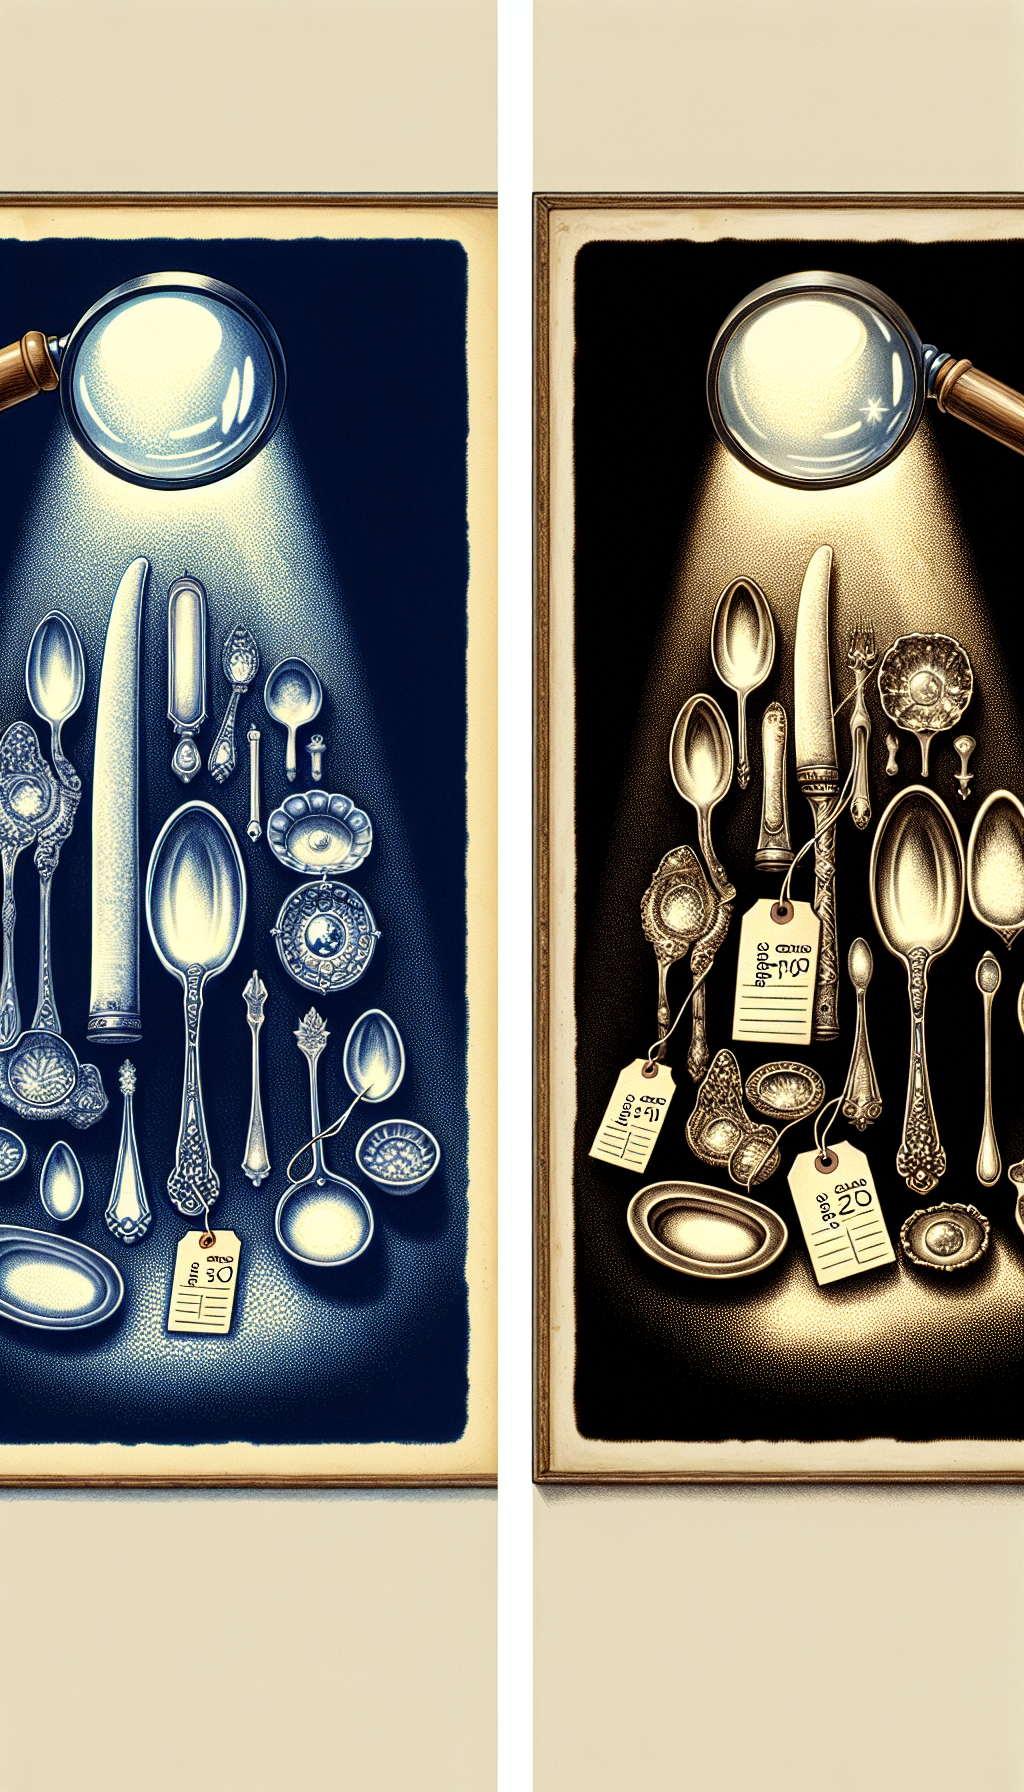 An illustration featuring a split-view comparison: on one side, a pristine antique silverware set with a magnifying glass highlighting its intricate, ornate patterns, and shimmering value tags floating above. On the other side, the same items appear tarnished, with visible dents and scratches, while diminished value tags dangle from frayed strings, all under the watchful eye of an appraiser’s lens.